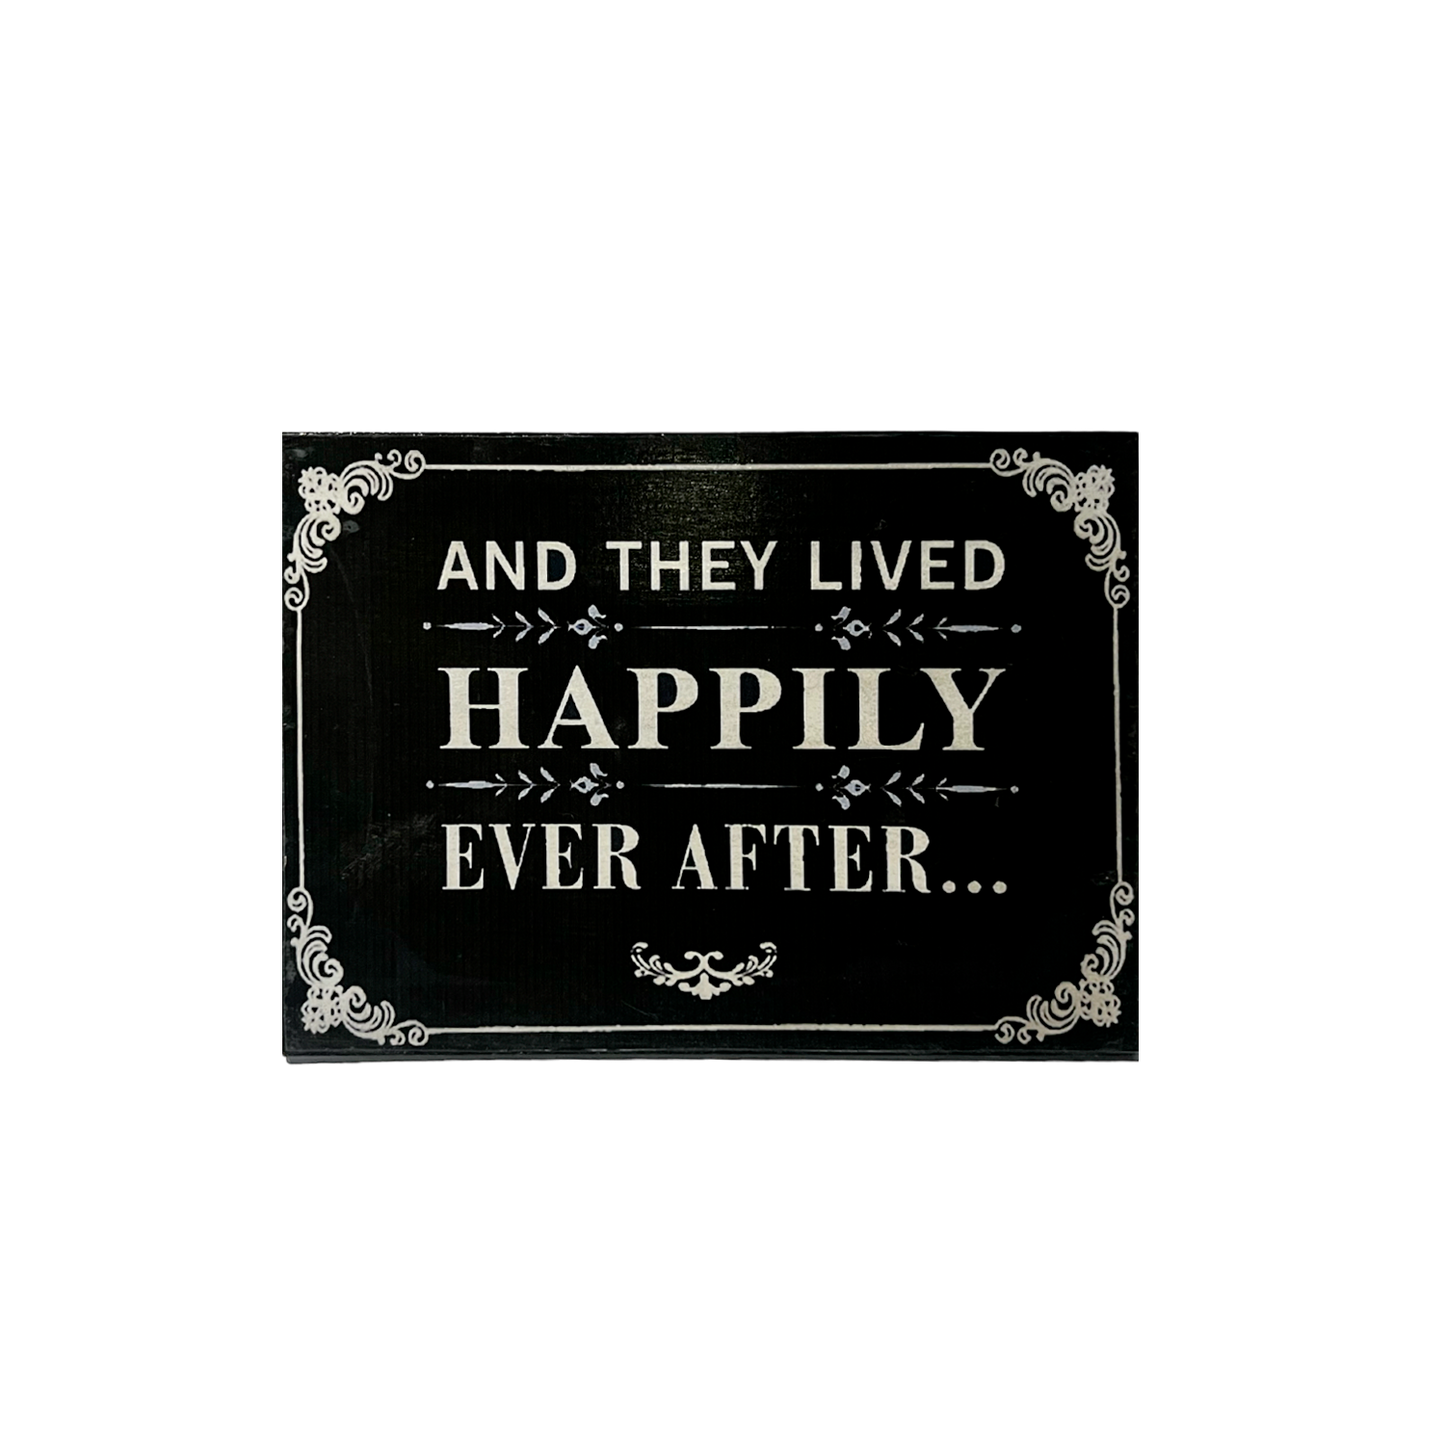 Afiche "And they lived happily ever after"